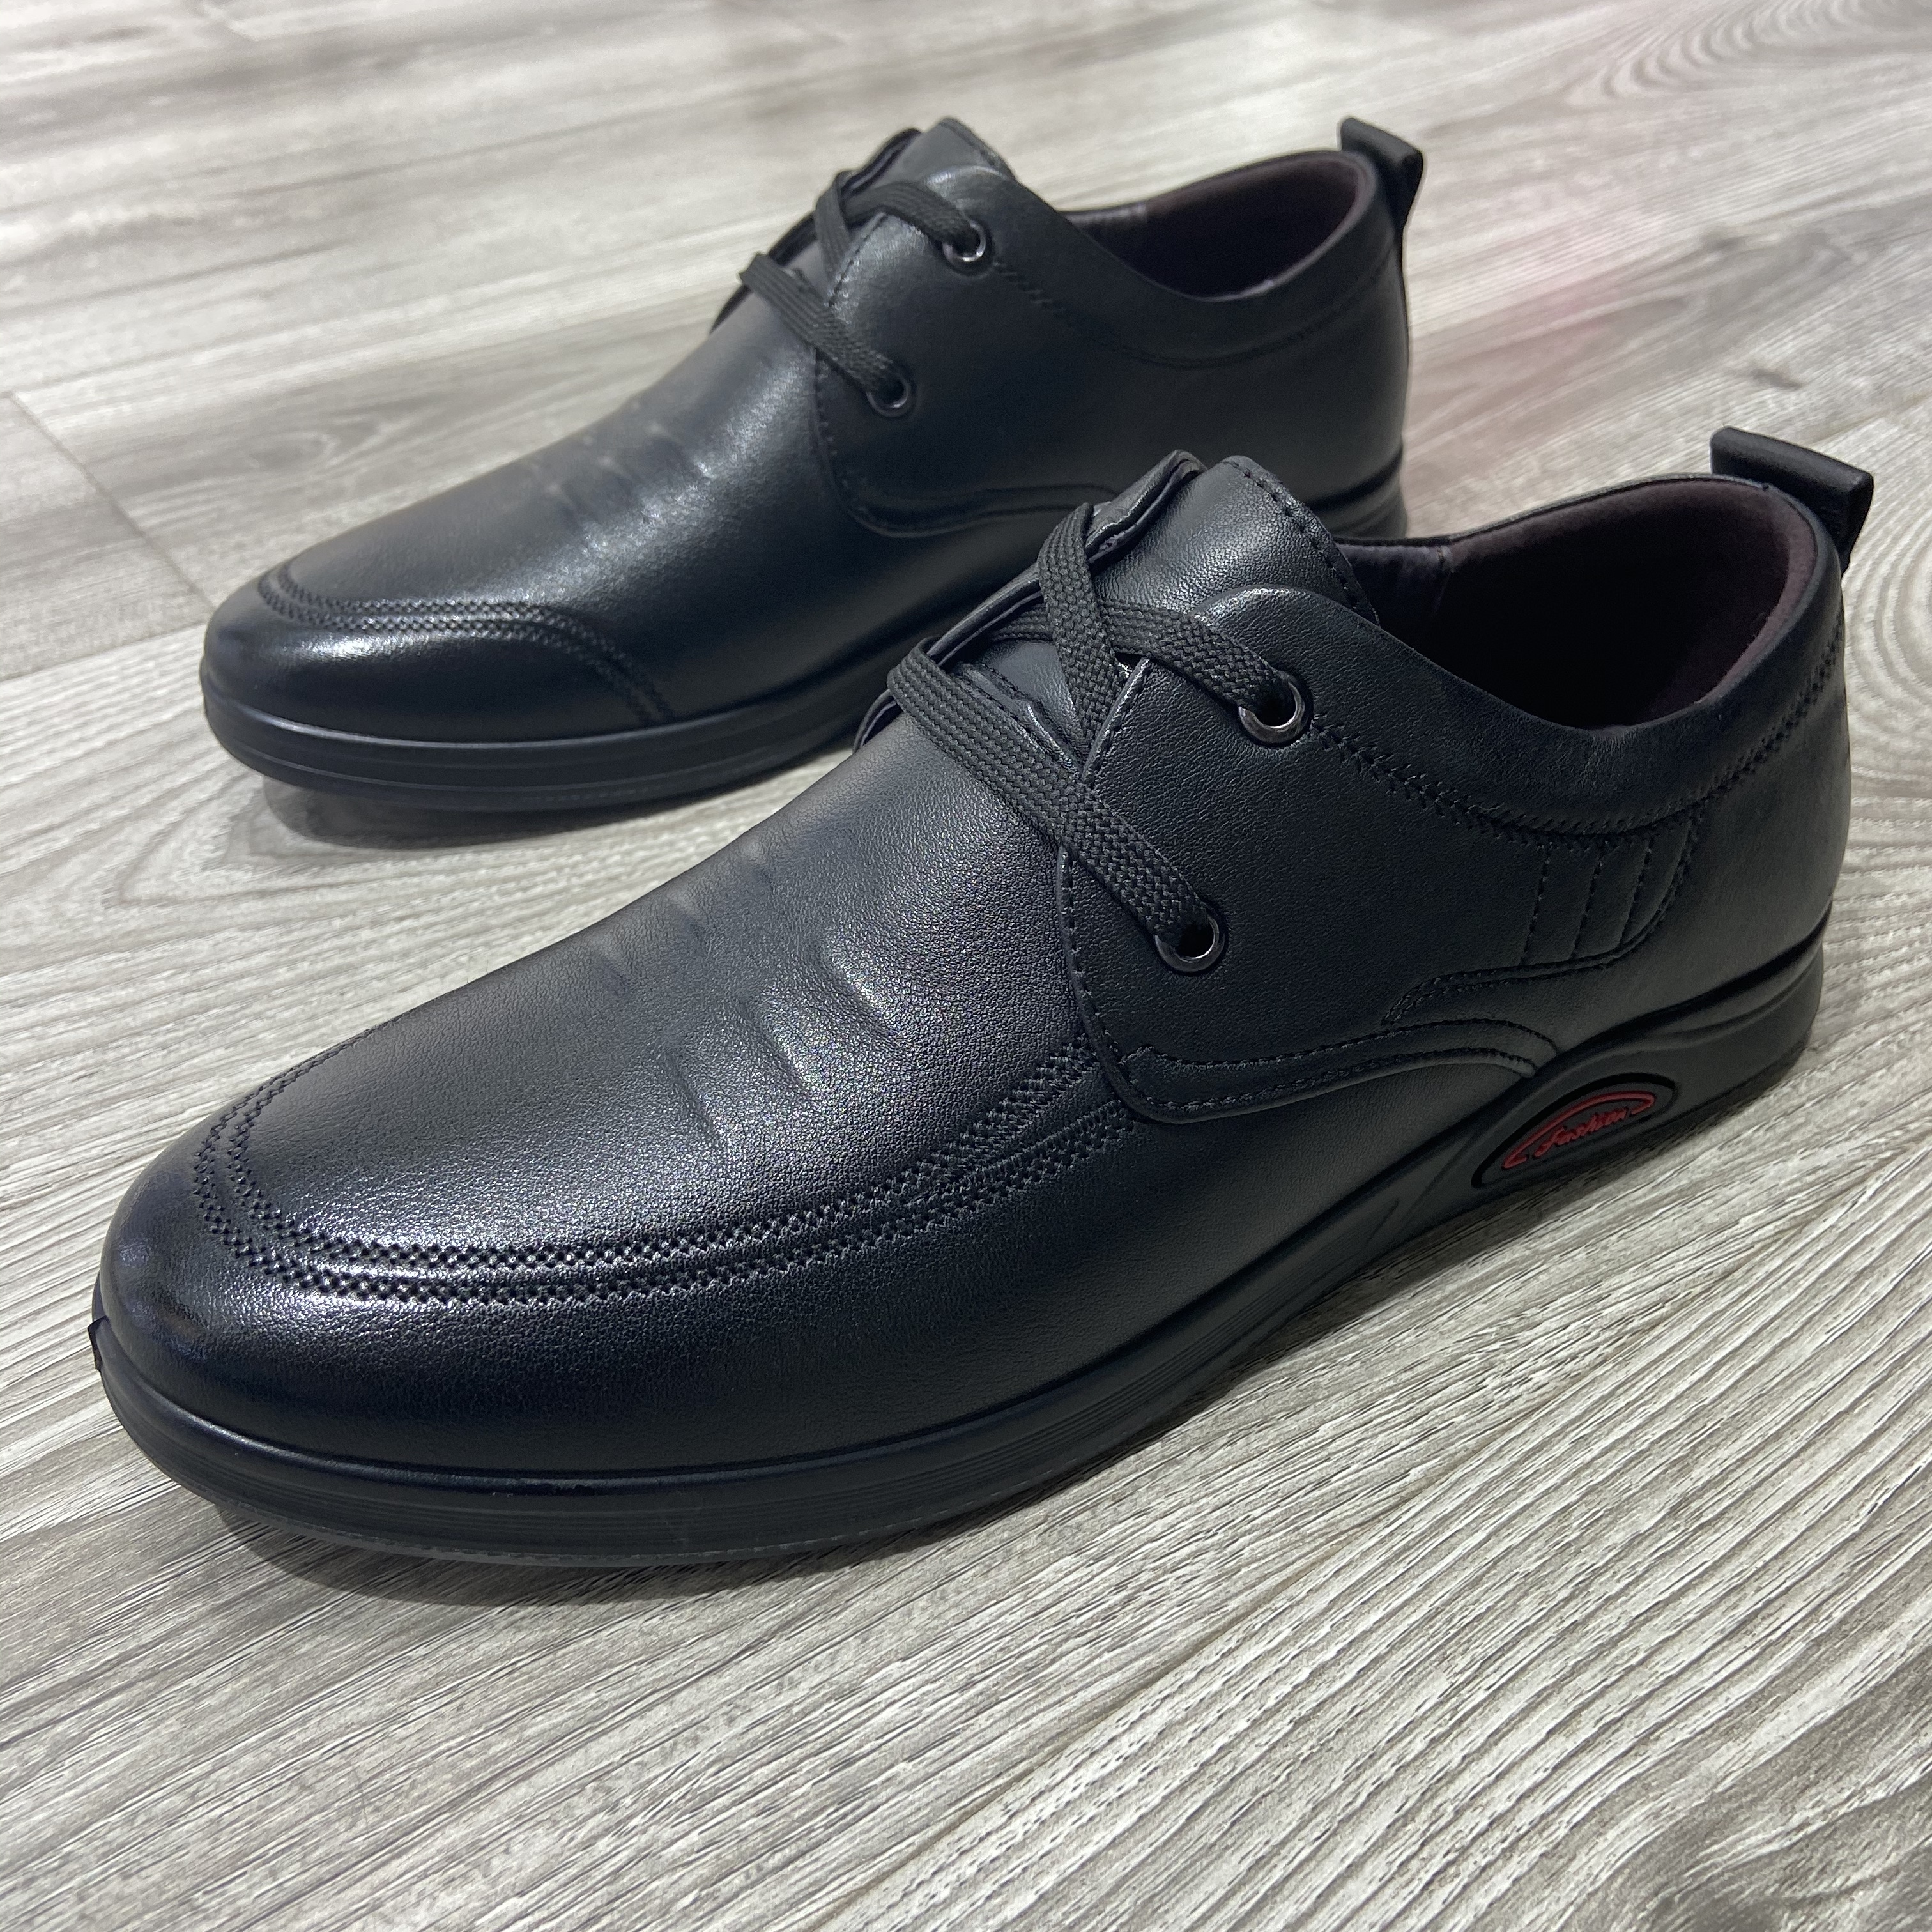 dress shoes for young guys